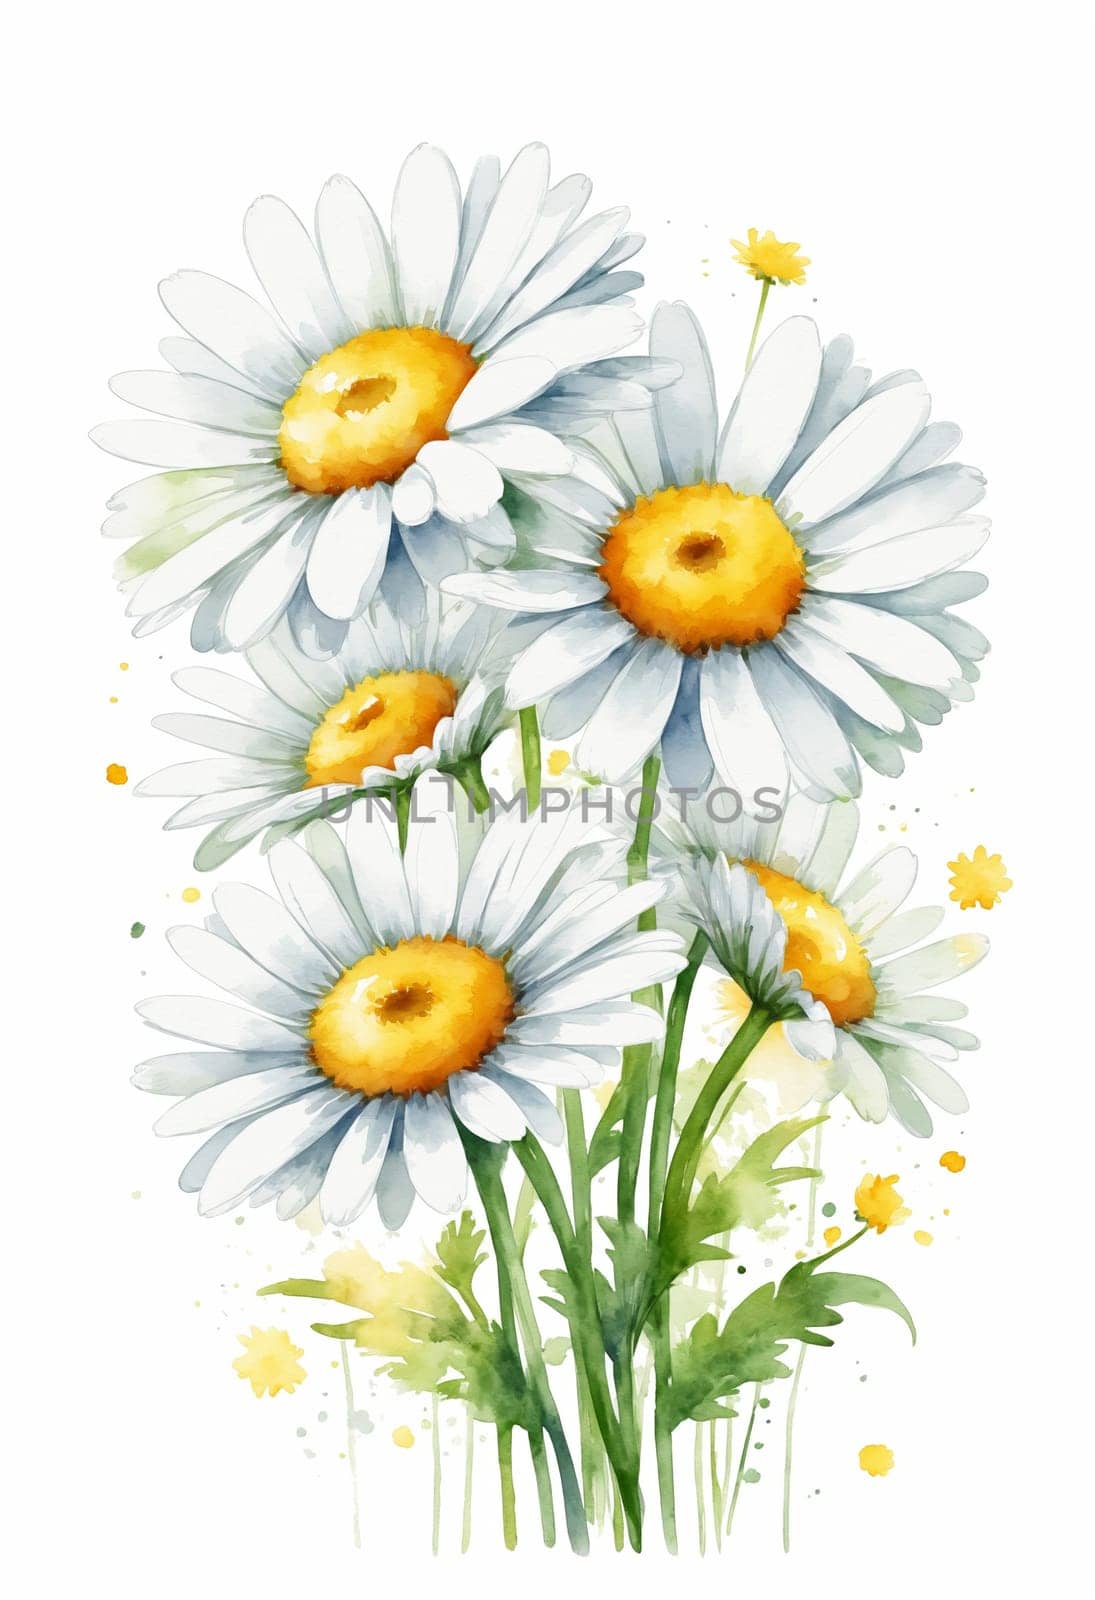 Beautiful image with watercolor daisies on white background by Andre1ns